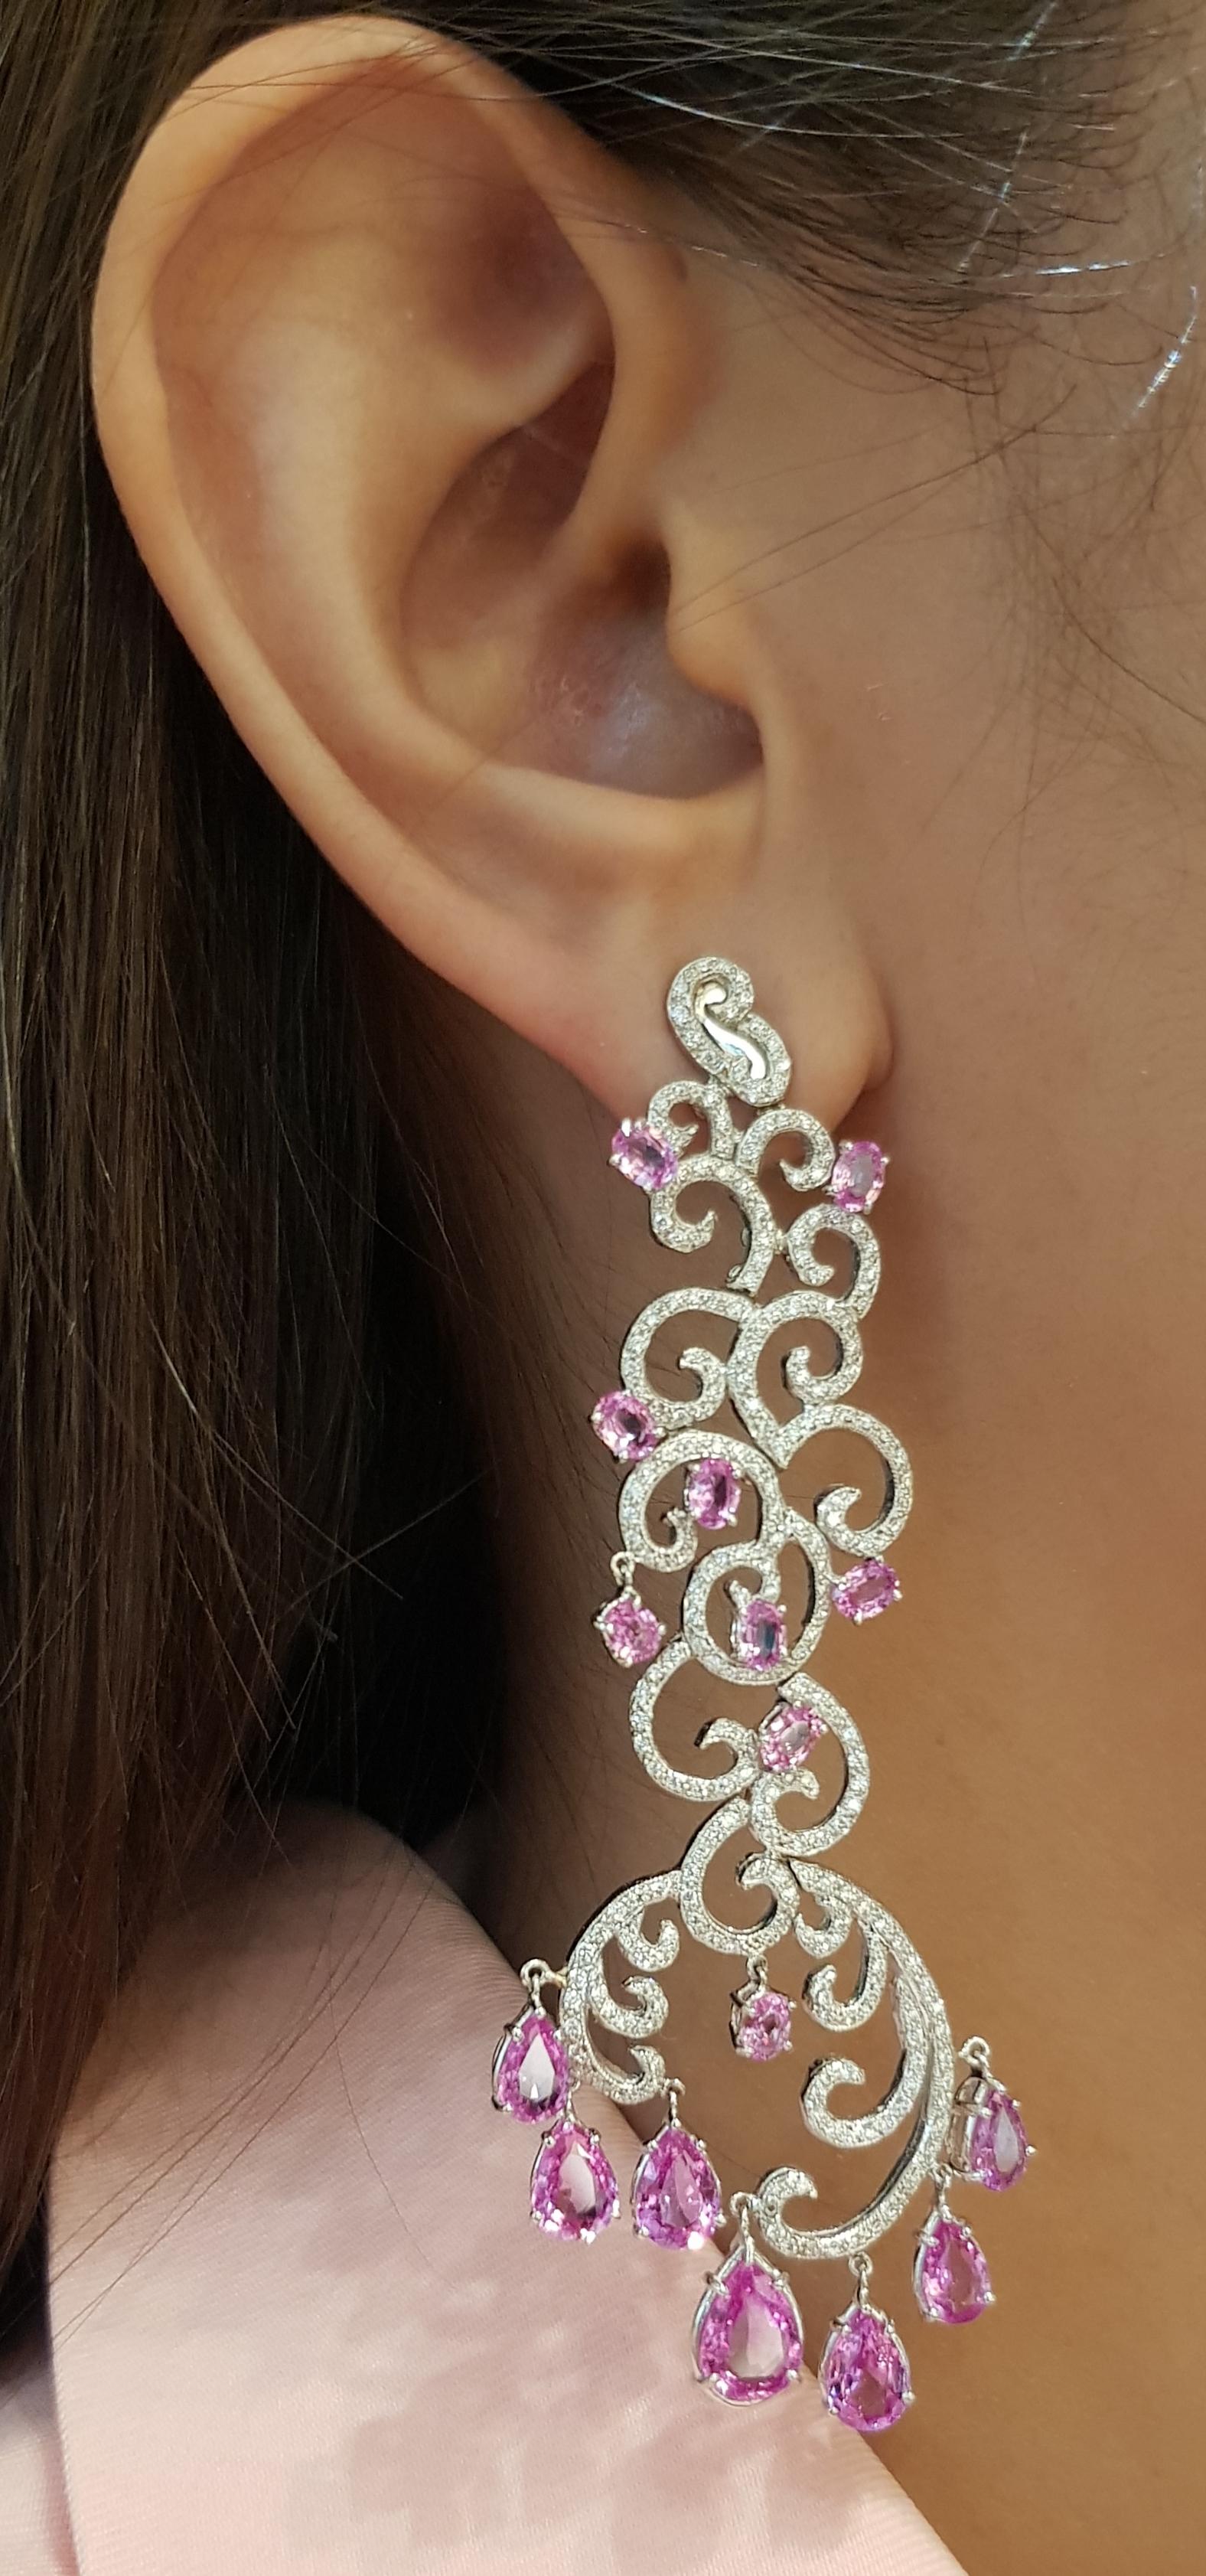 Pink Sapphire 13.21 carats with Diamond 1.73 carats Earrings set in 18 Karat White Gold Settings

Width:  2.8 cm 
Length:  8.0 cm
Total Weight: 26.61 grams

